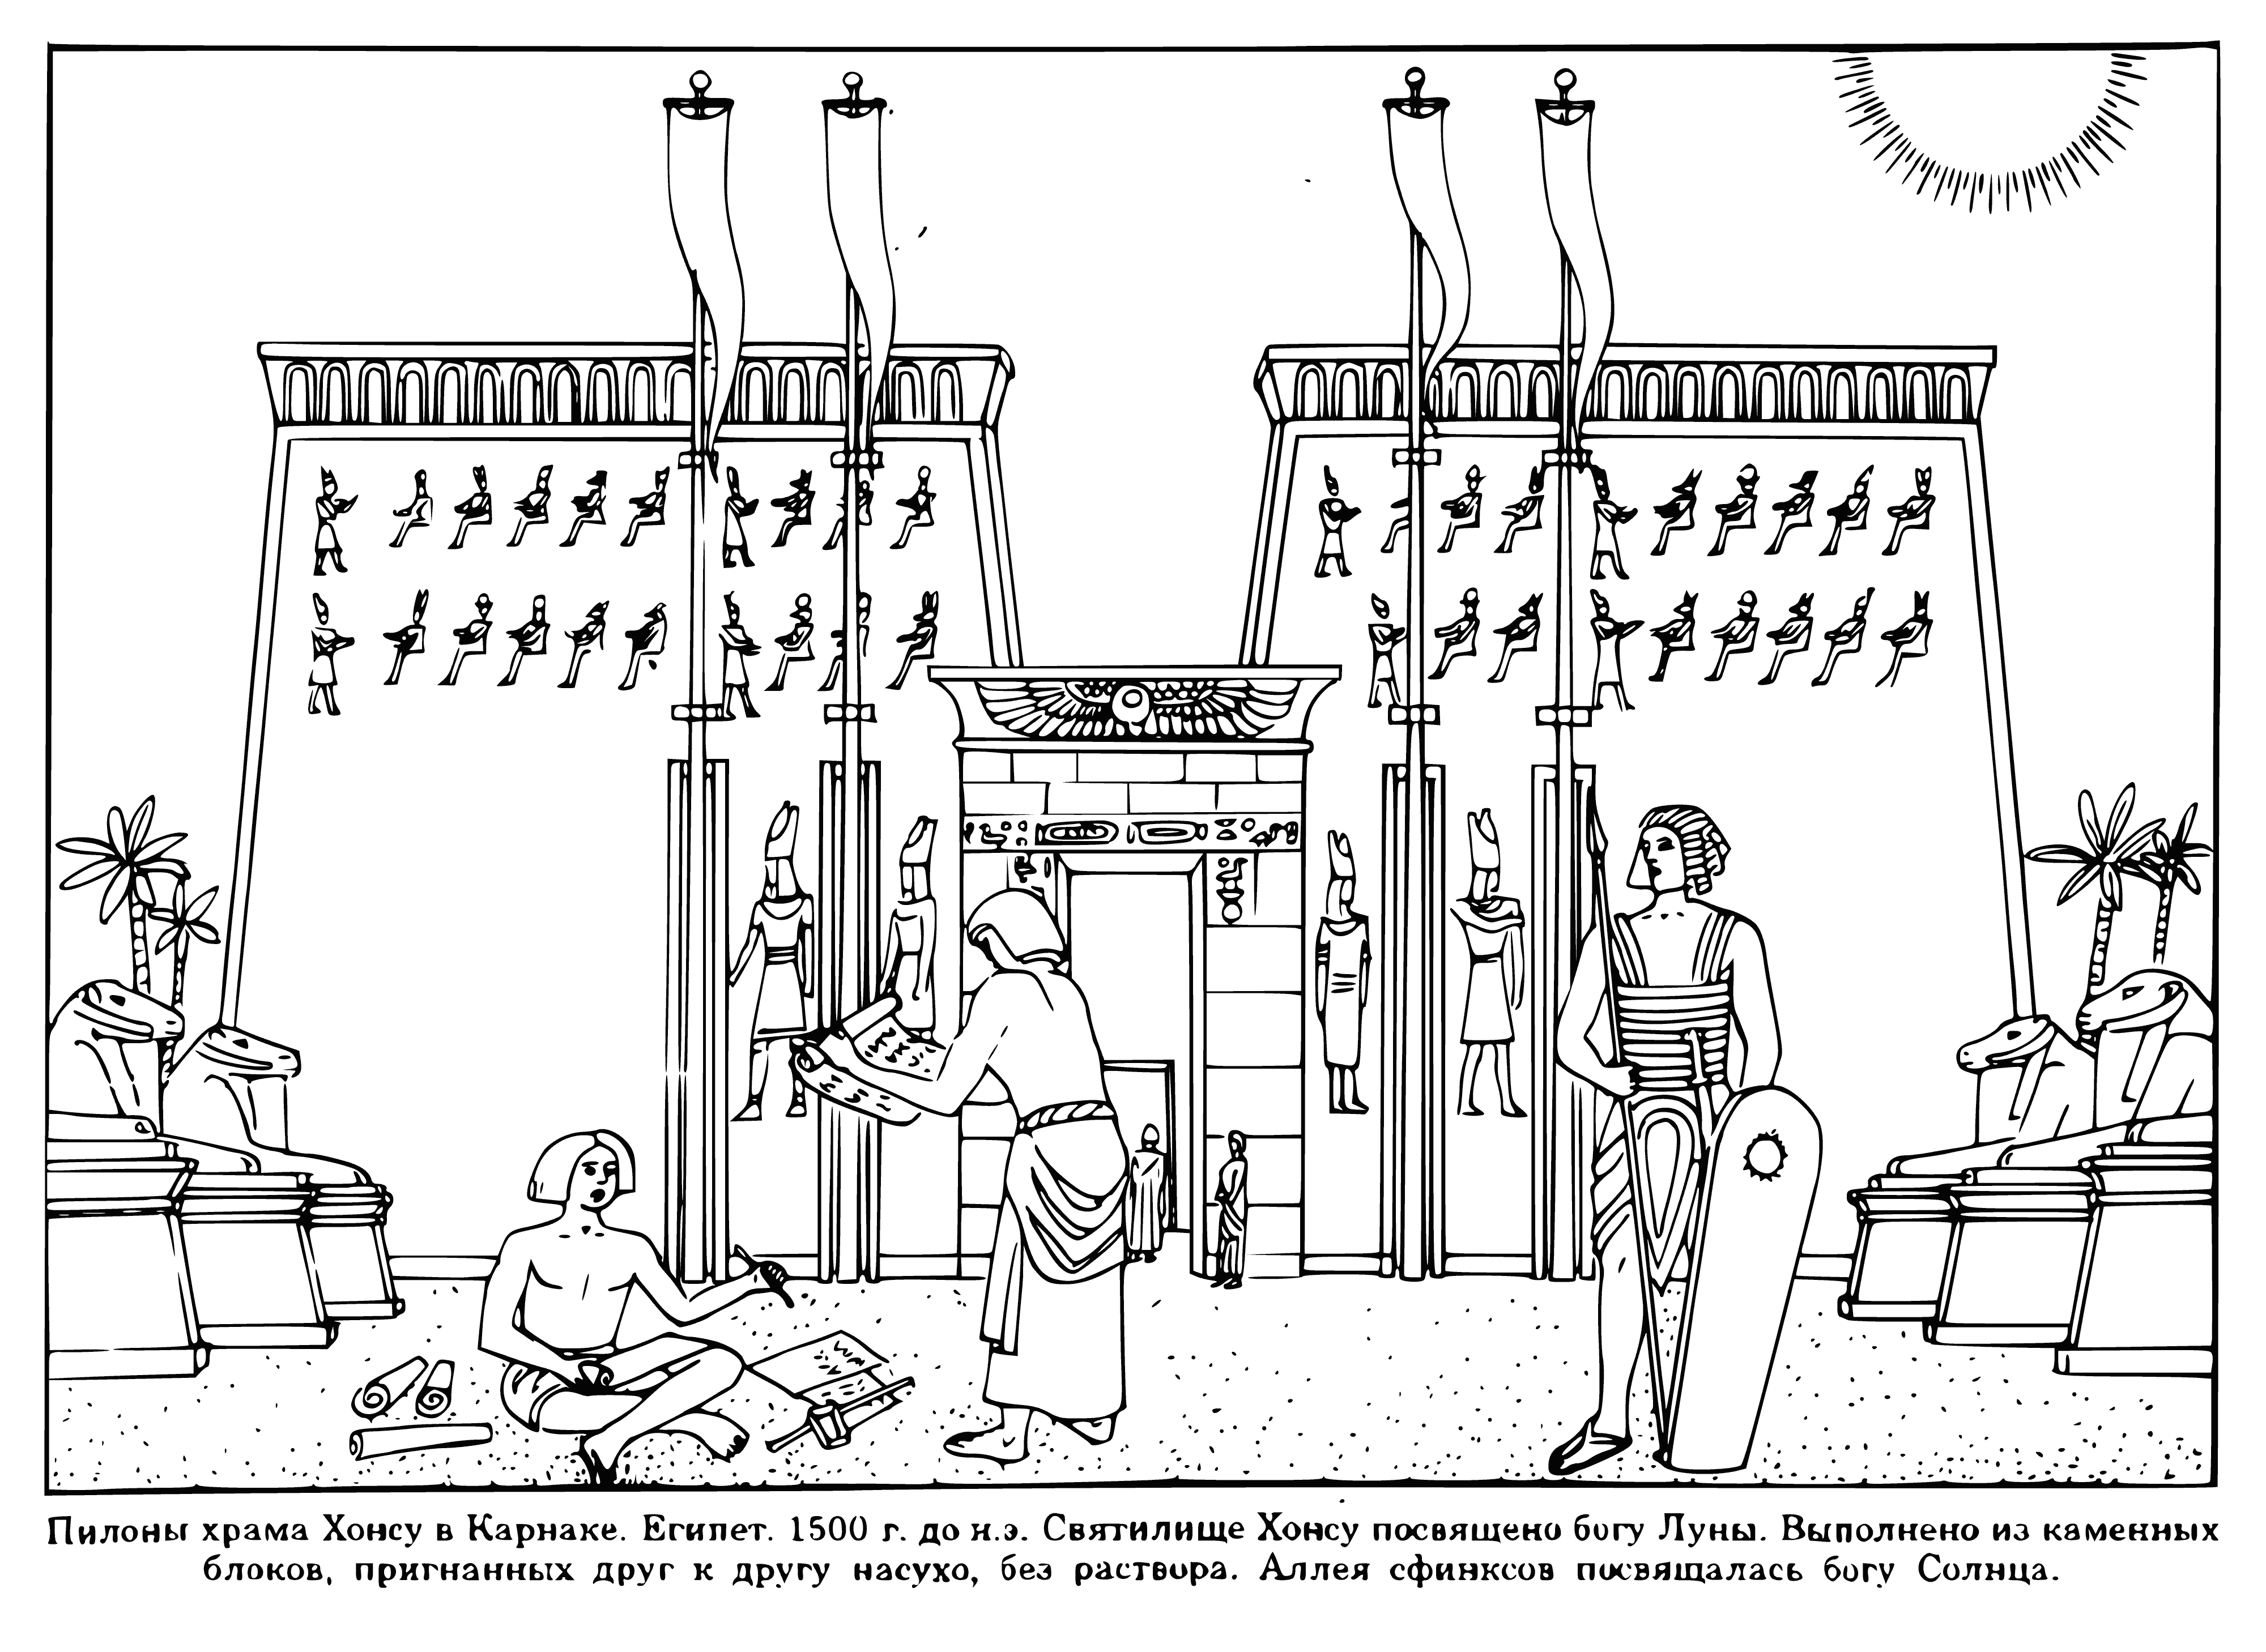 coloring page: The ancient Khonsu temple was built in Egyptian style, and featured a large central room & smaller chambers with reliefs & paintings.